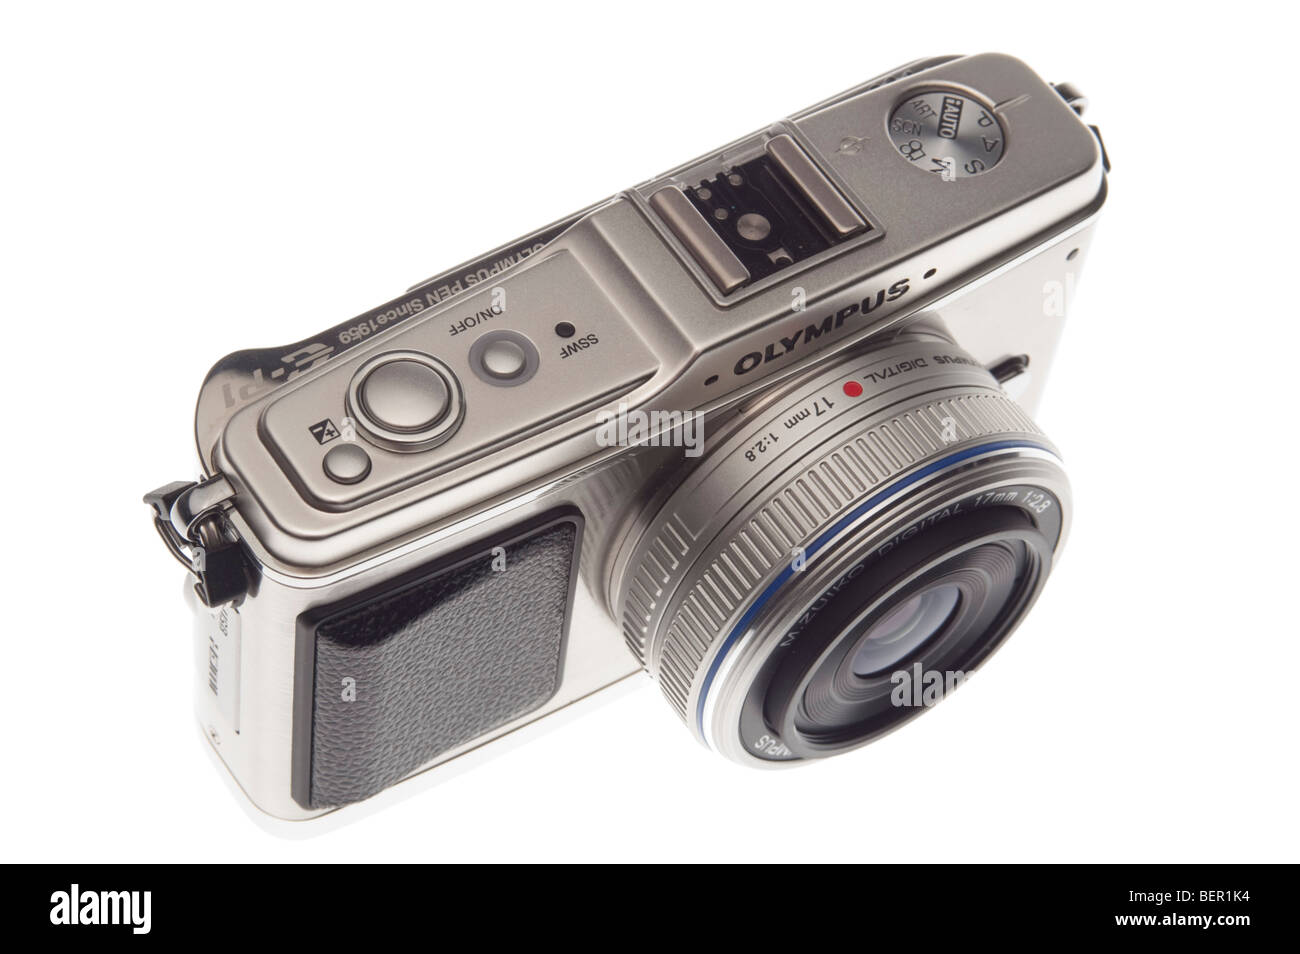 Olympus 'Pen Digital' or EP-1 FourThirds format digital camera 2009 with retro metal styling Stock Photo